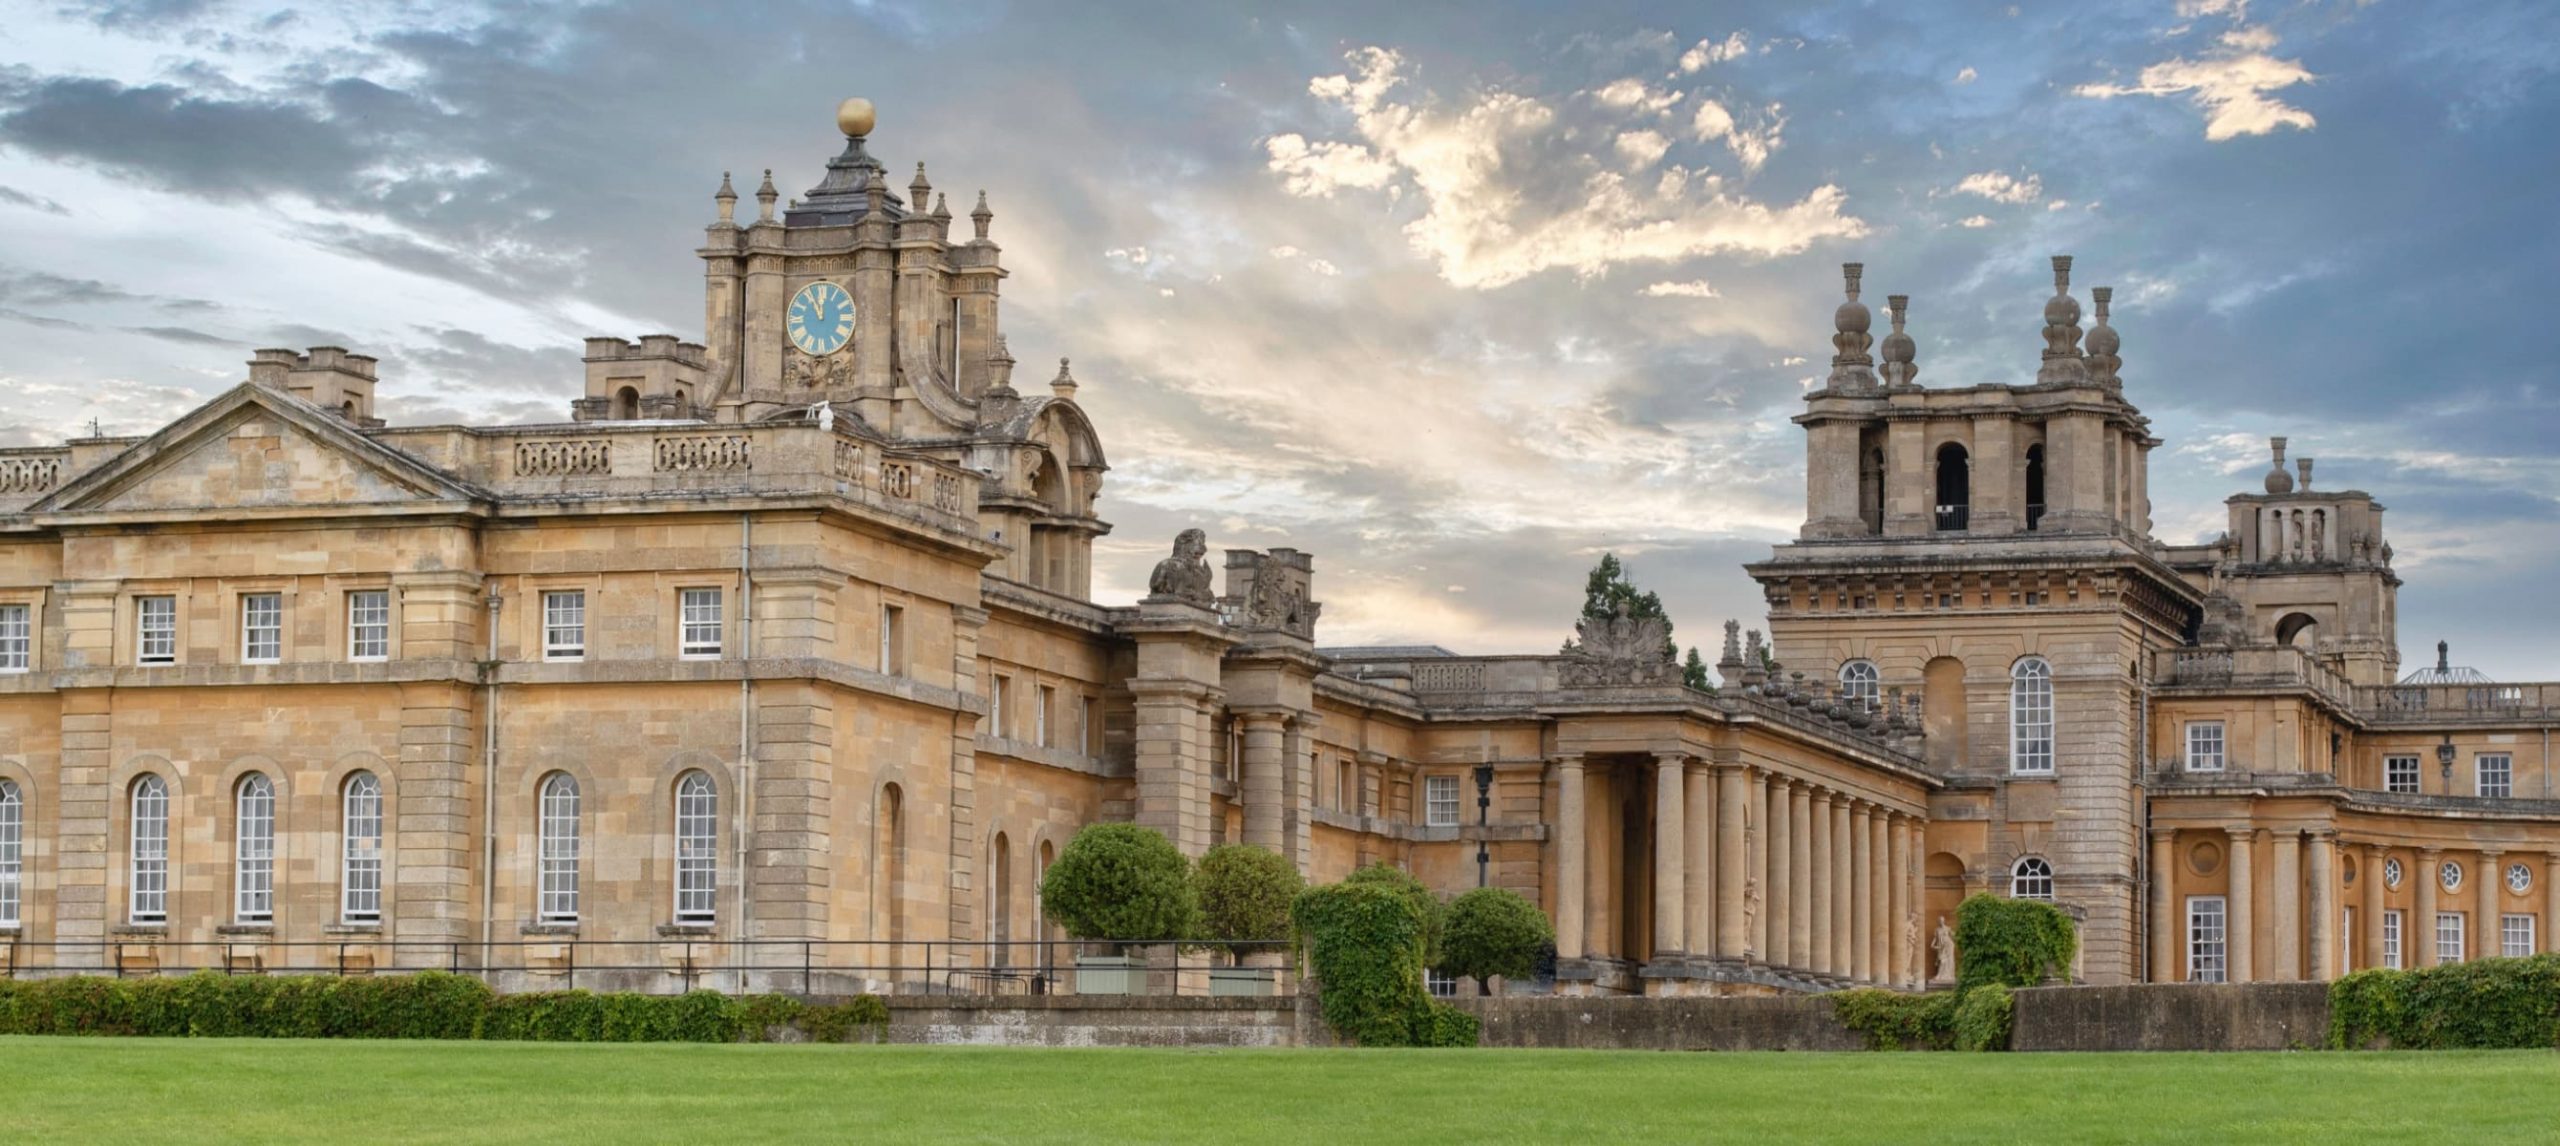 Visiting The Blenheim Palace: All You Need To Know